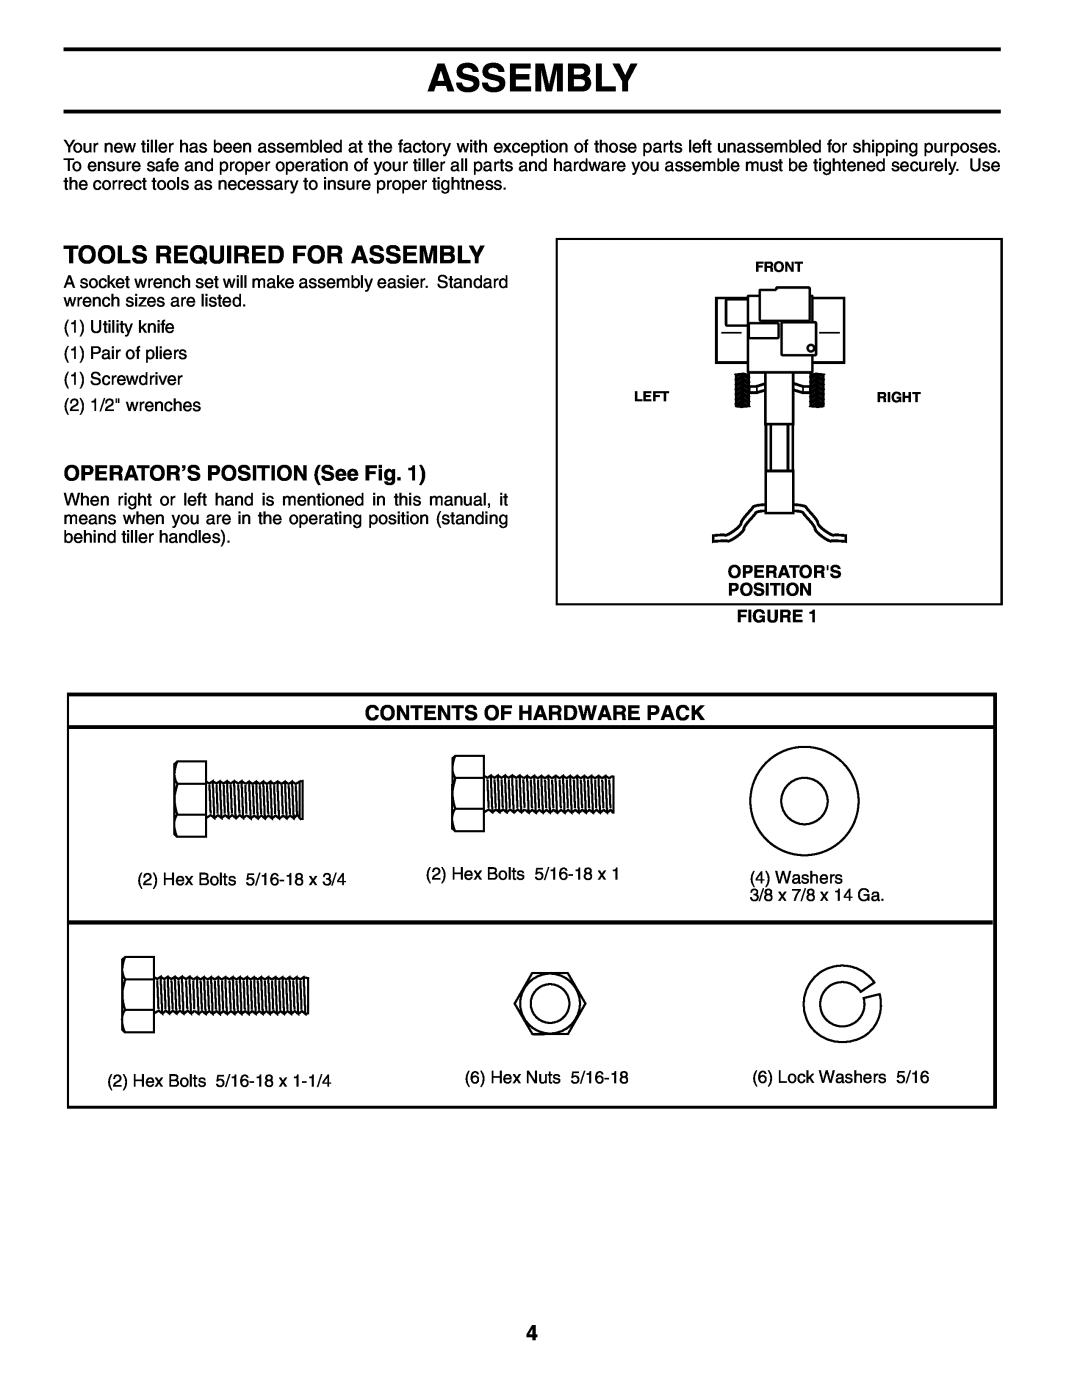 Electrolux FN620K owner manual Tools Required For Assembly, OPERATOR’S POSITION See Fig, Contents Of Hardware Pack 